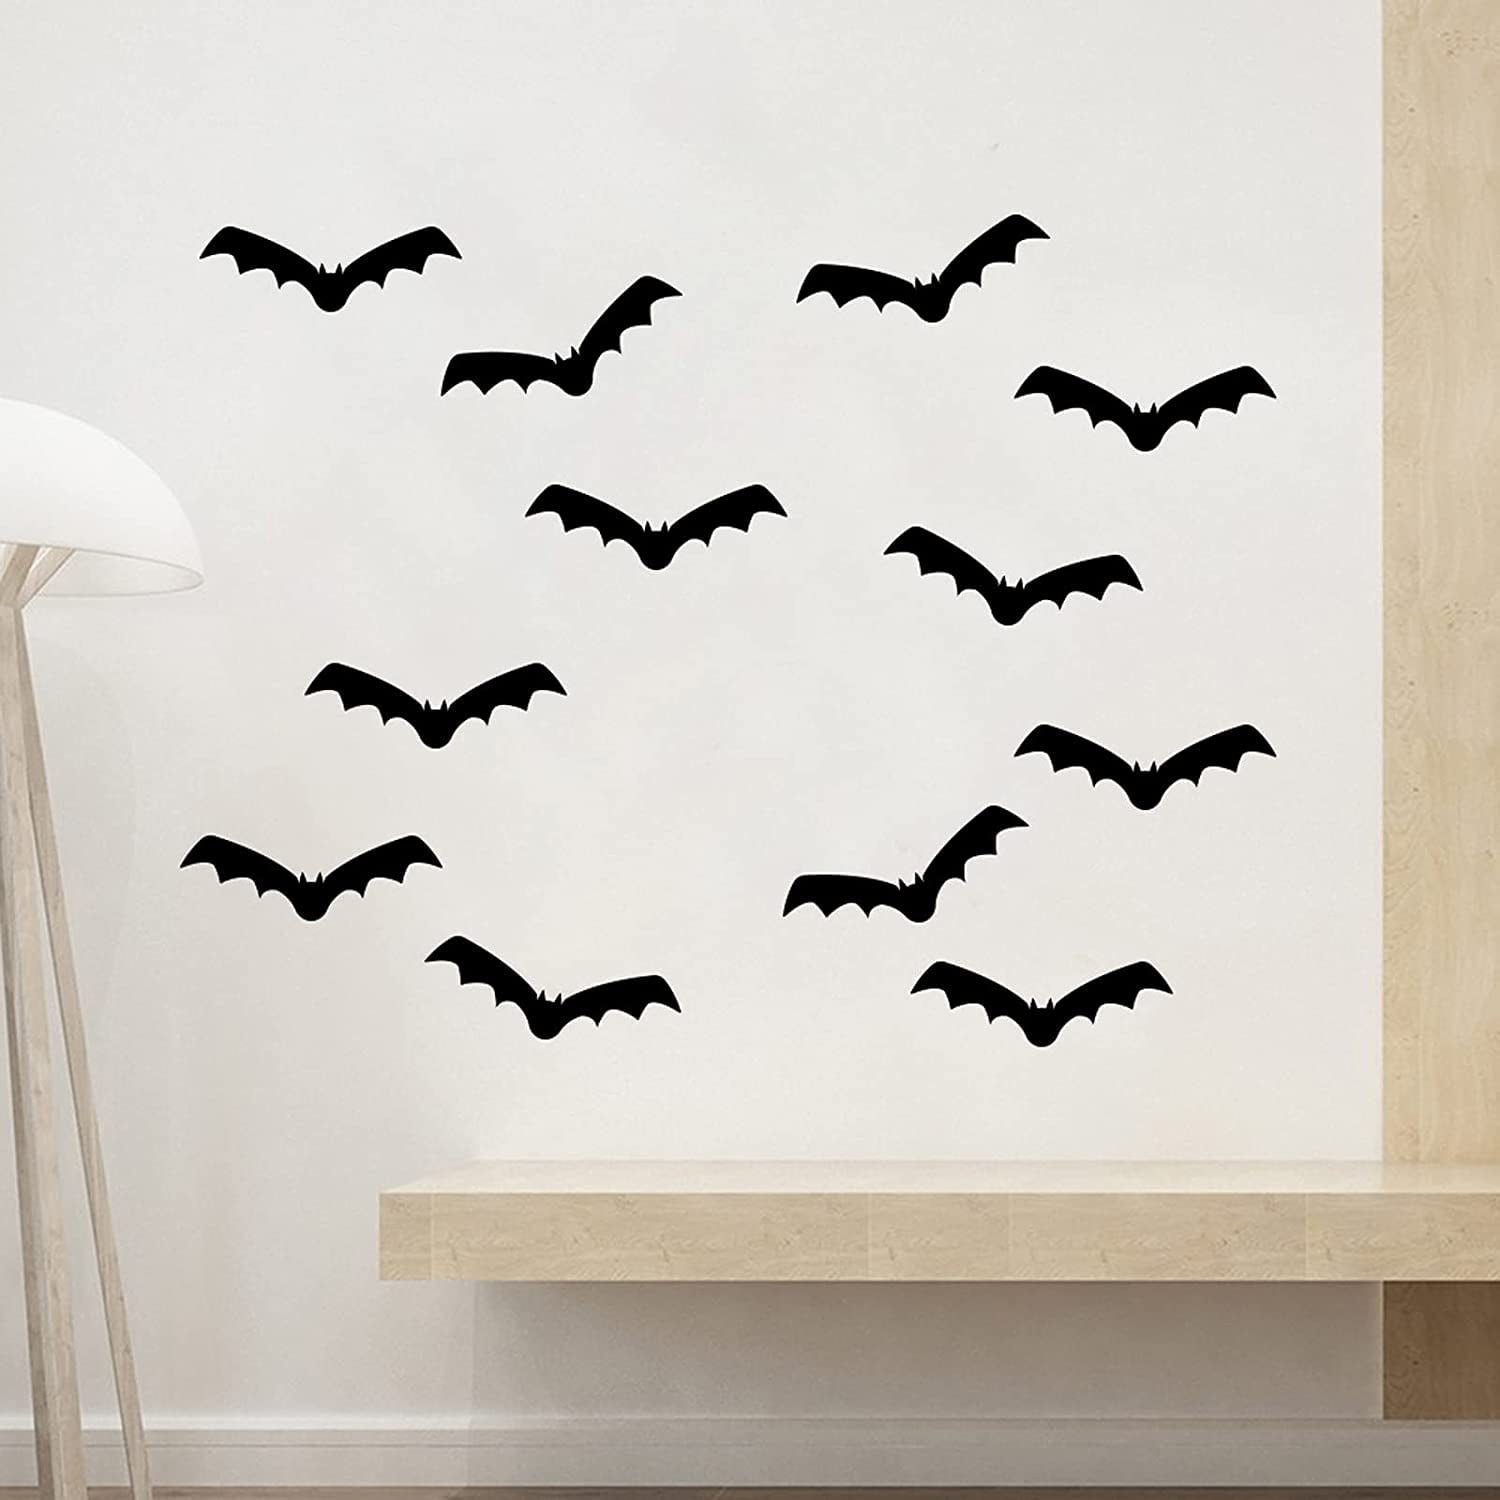 4 Sheets Halloween Window Stickers Halloween Scary Large Bats Spider Window Decor Electrostatic Sticker Bat Sticker Spider Sticker Halloween Window Clings for Halloween Party Home Kids Shop School